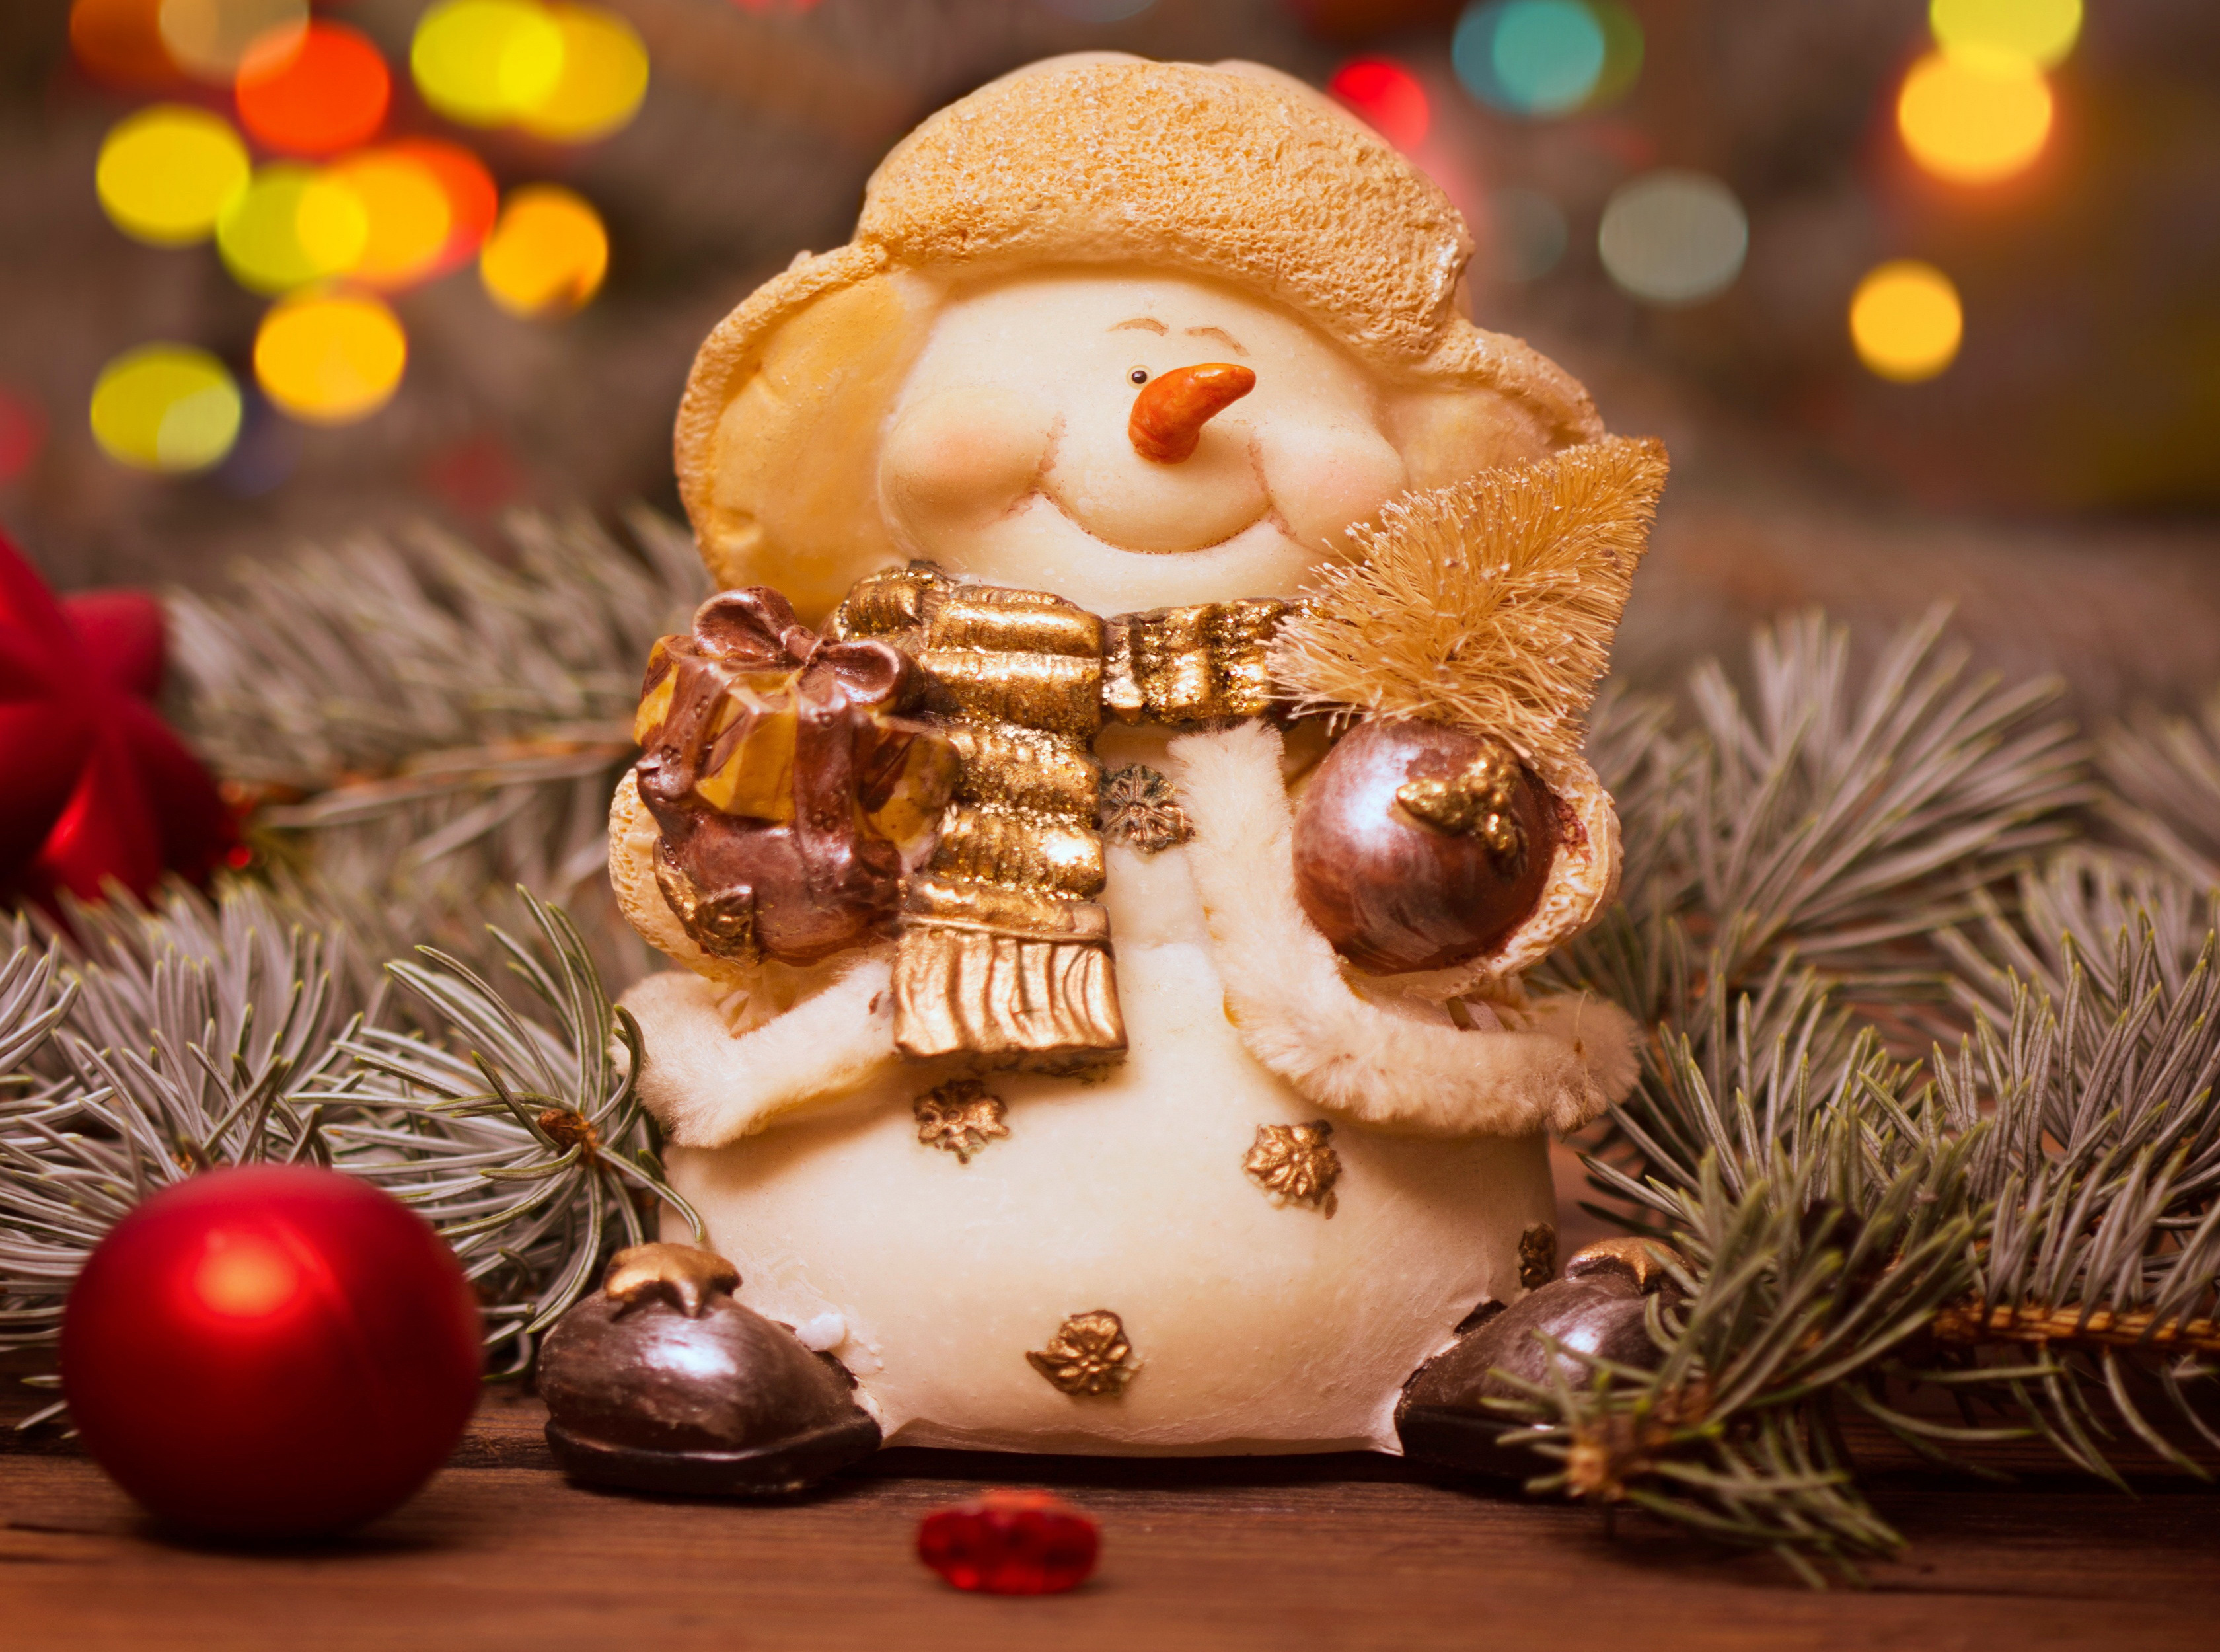 Wallpapers snowman new years toys holiday on the desktop